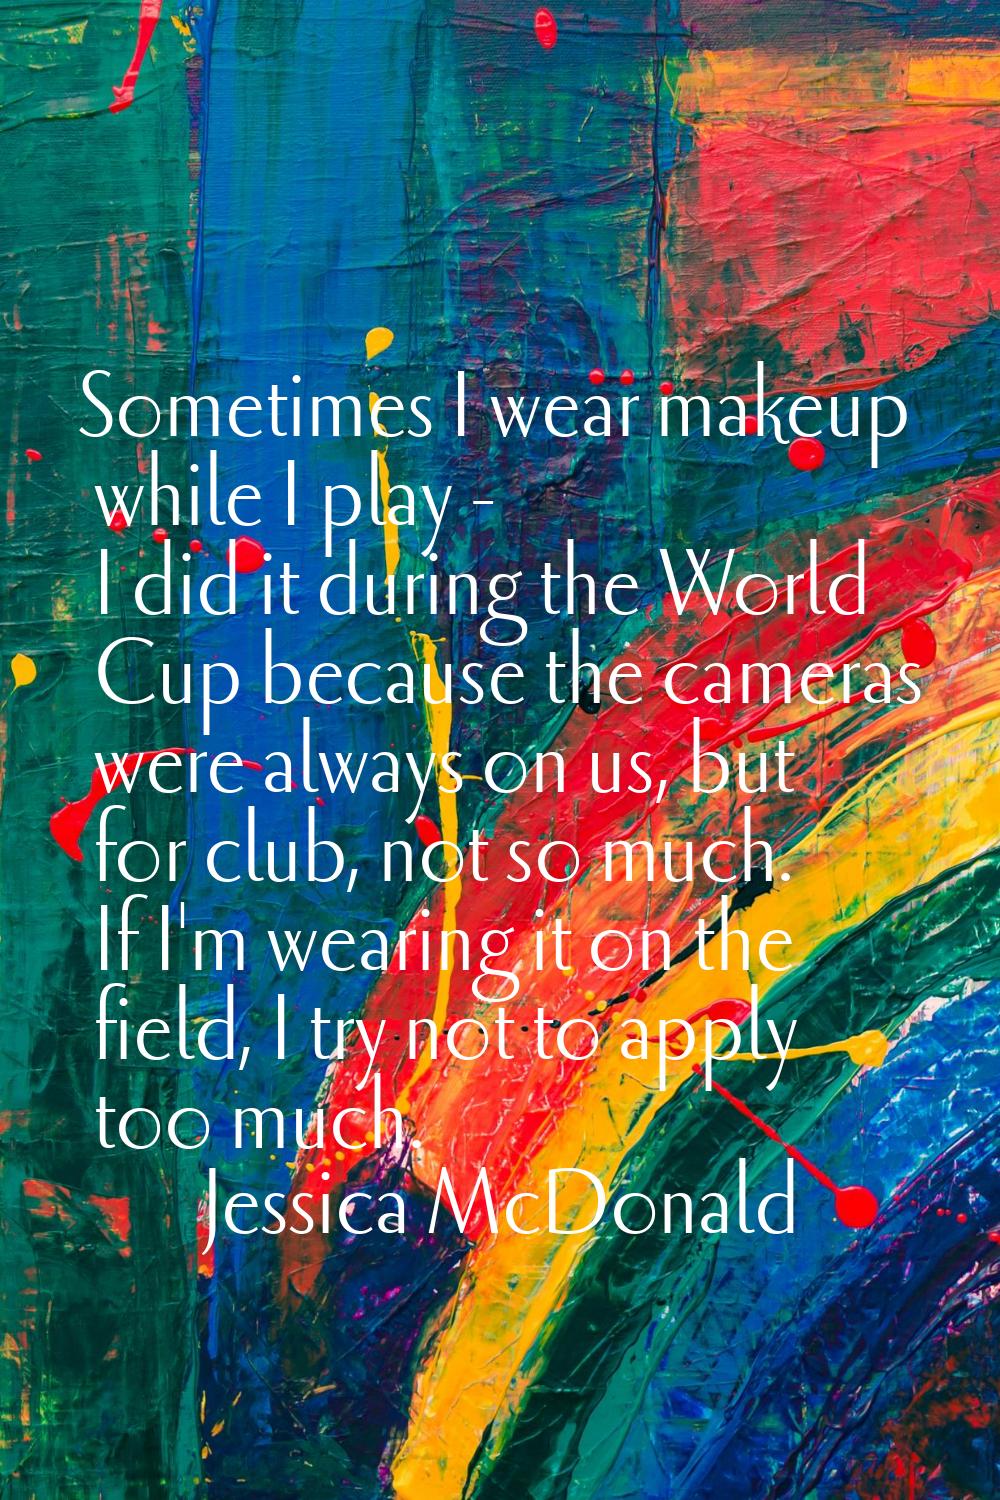 Sometimes I wear makeup while I play - I did it during the World Cup because the cameras were alway